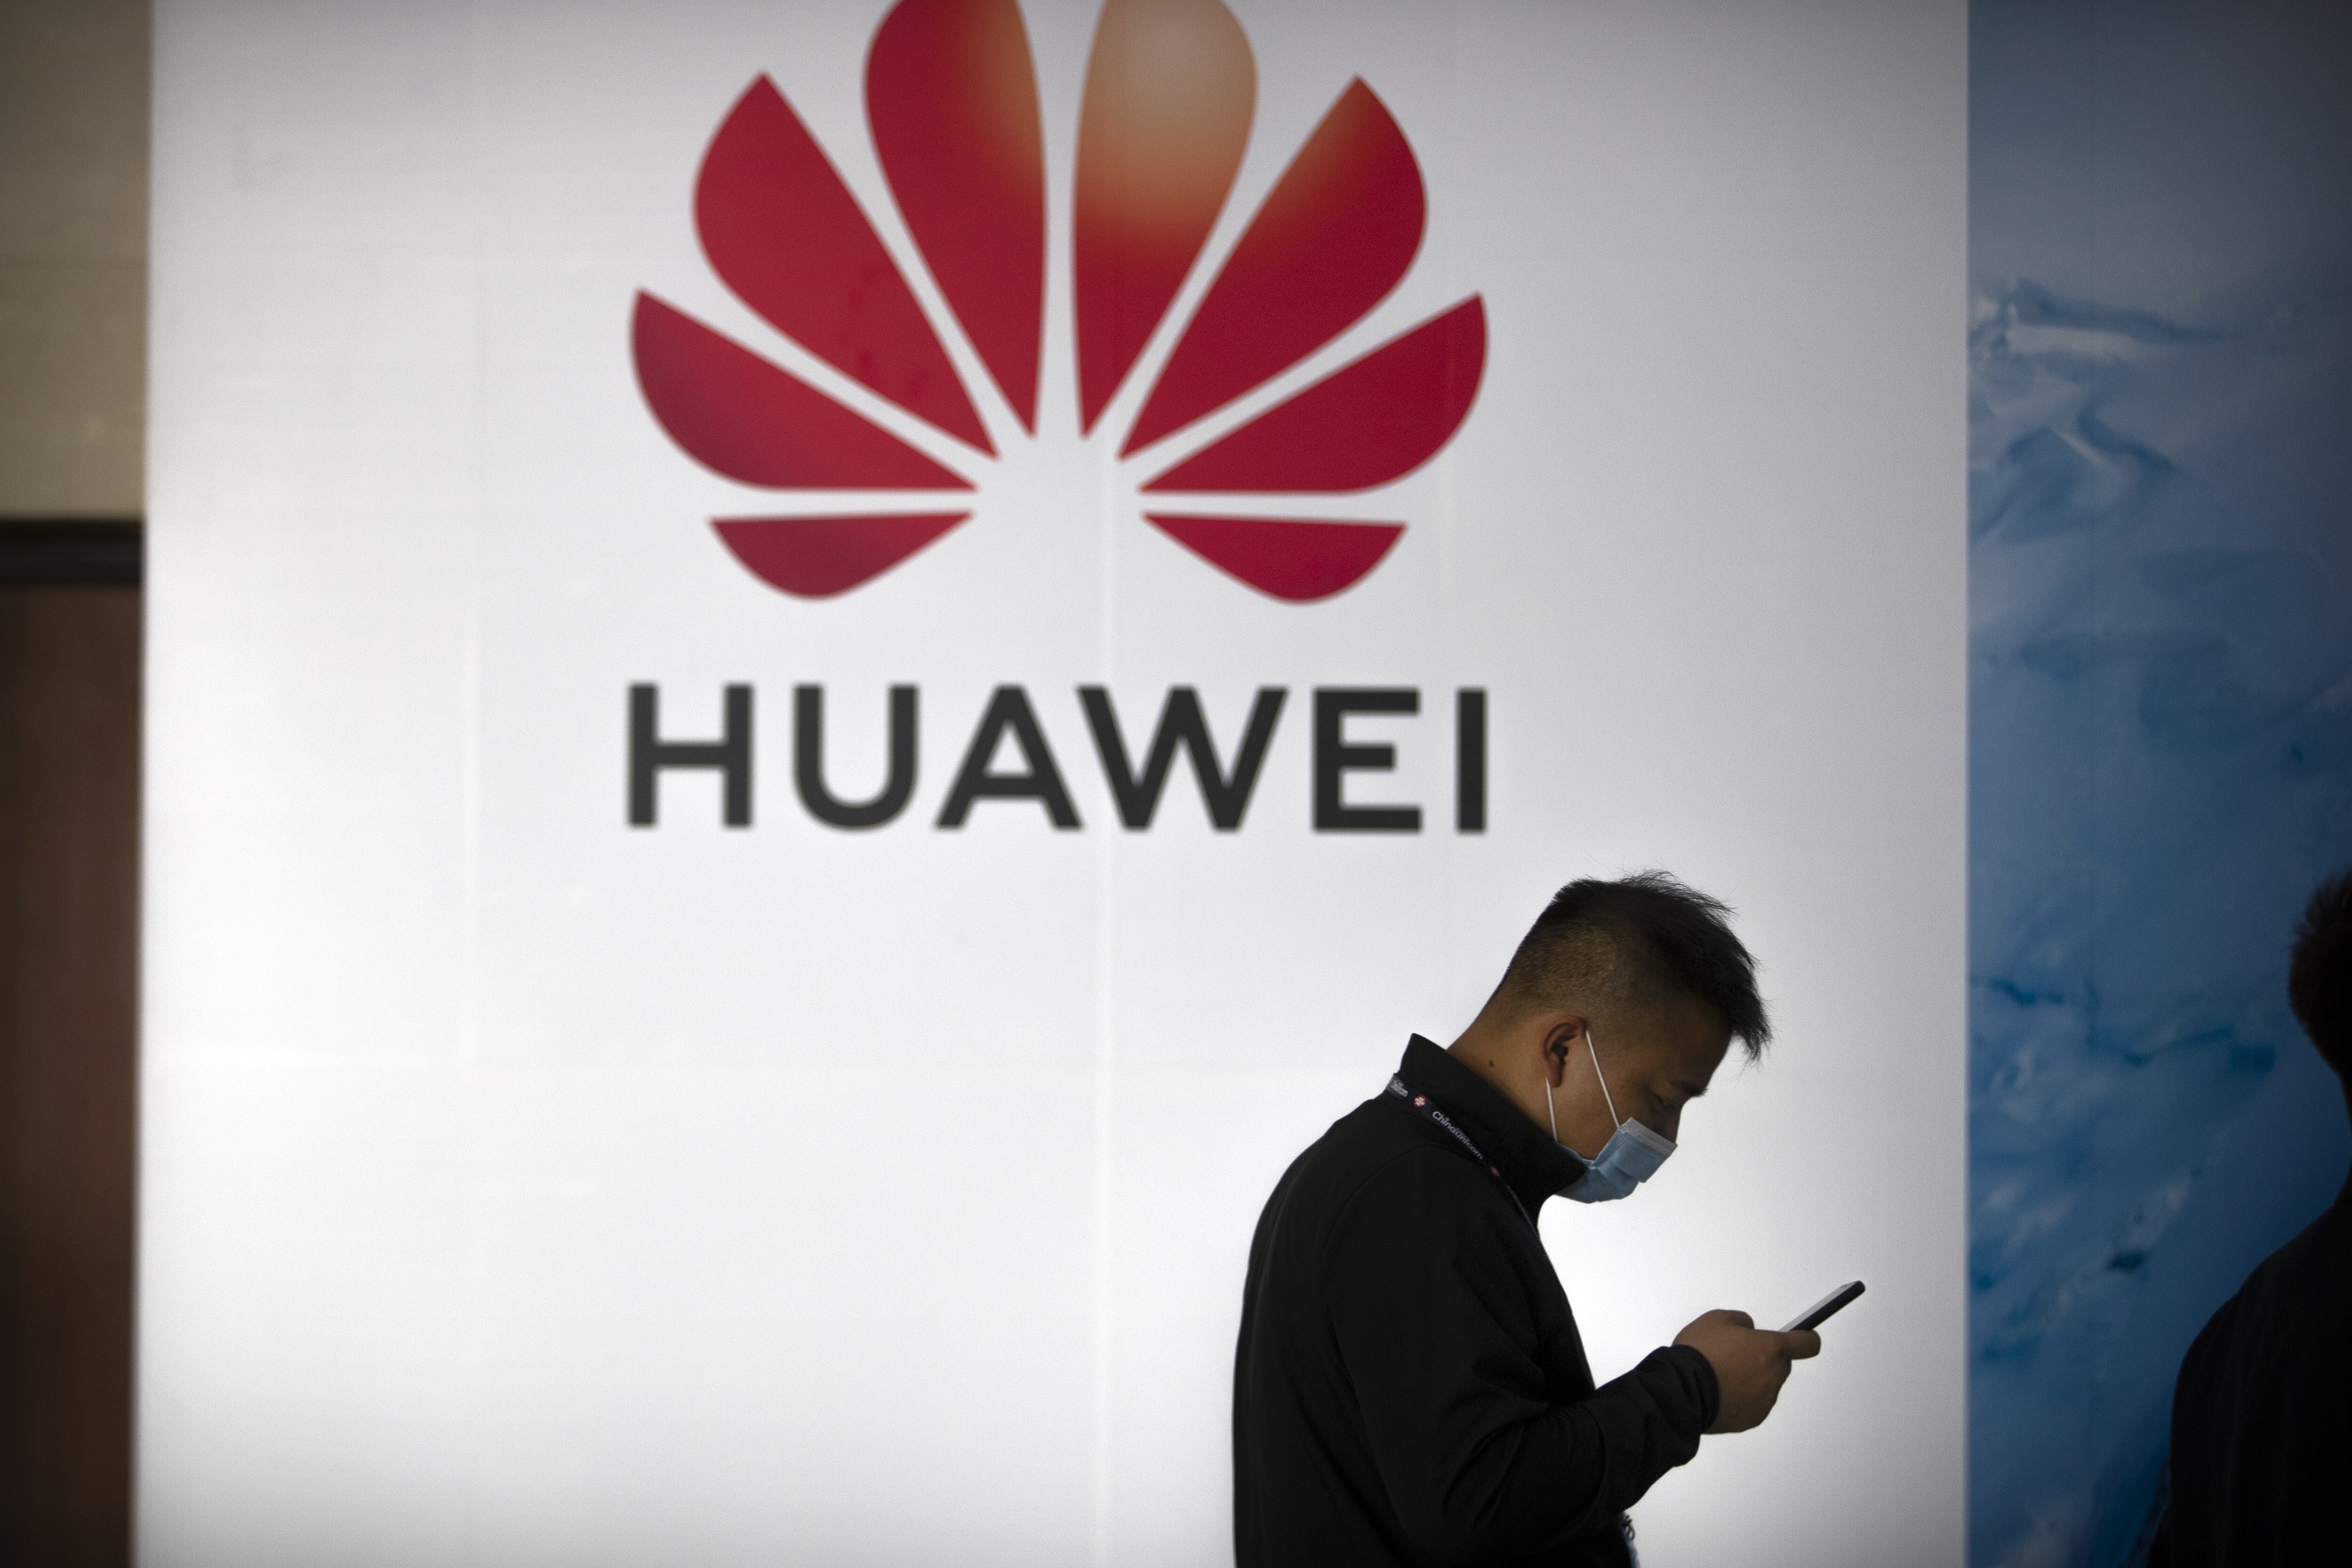 A man walks past a billboard showing the Huawei logo at the PT Expo in Beijing. Photo: AP